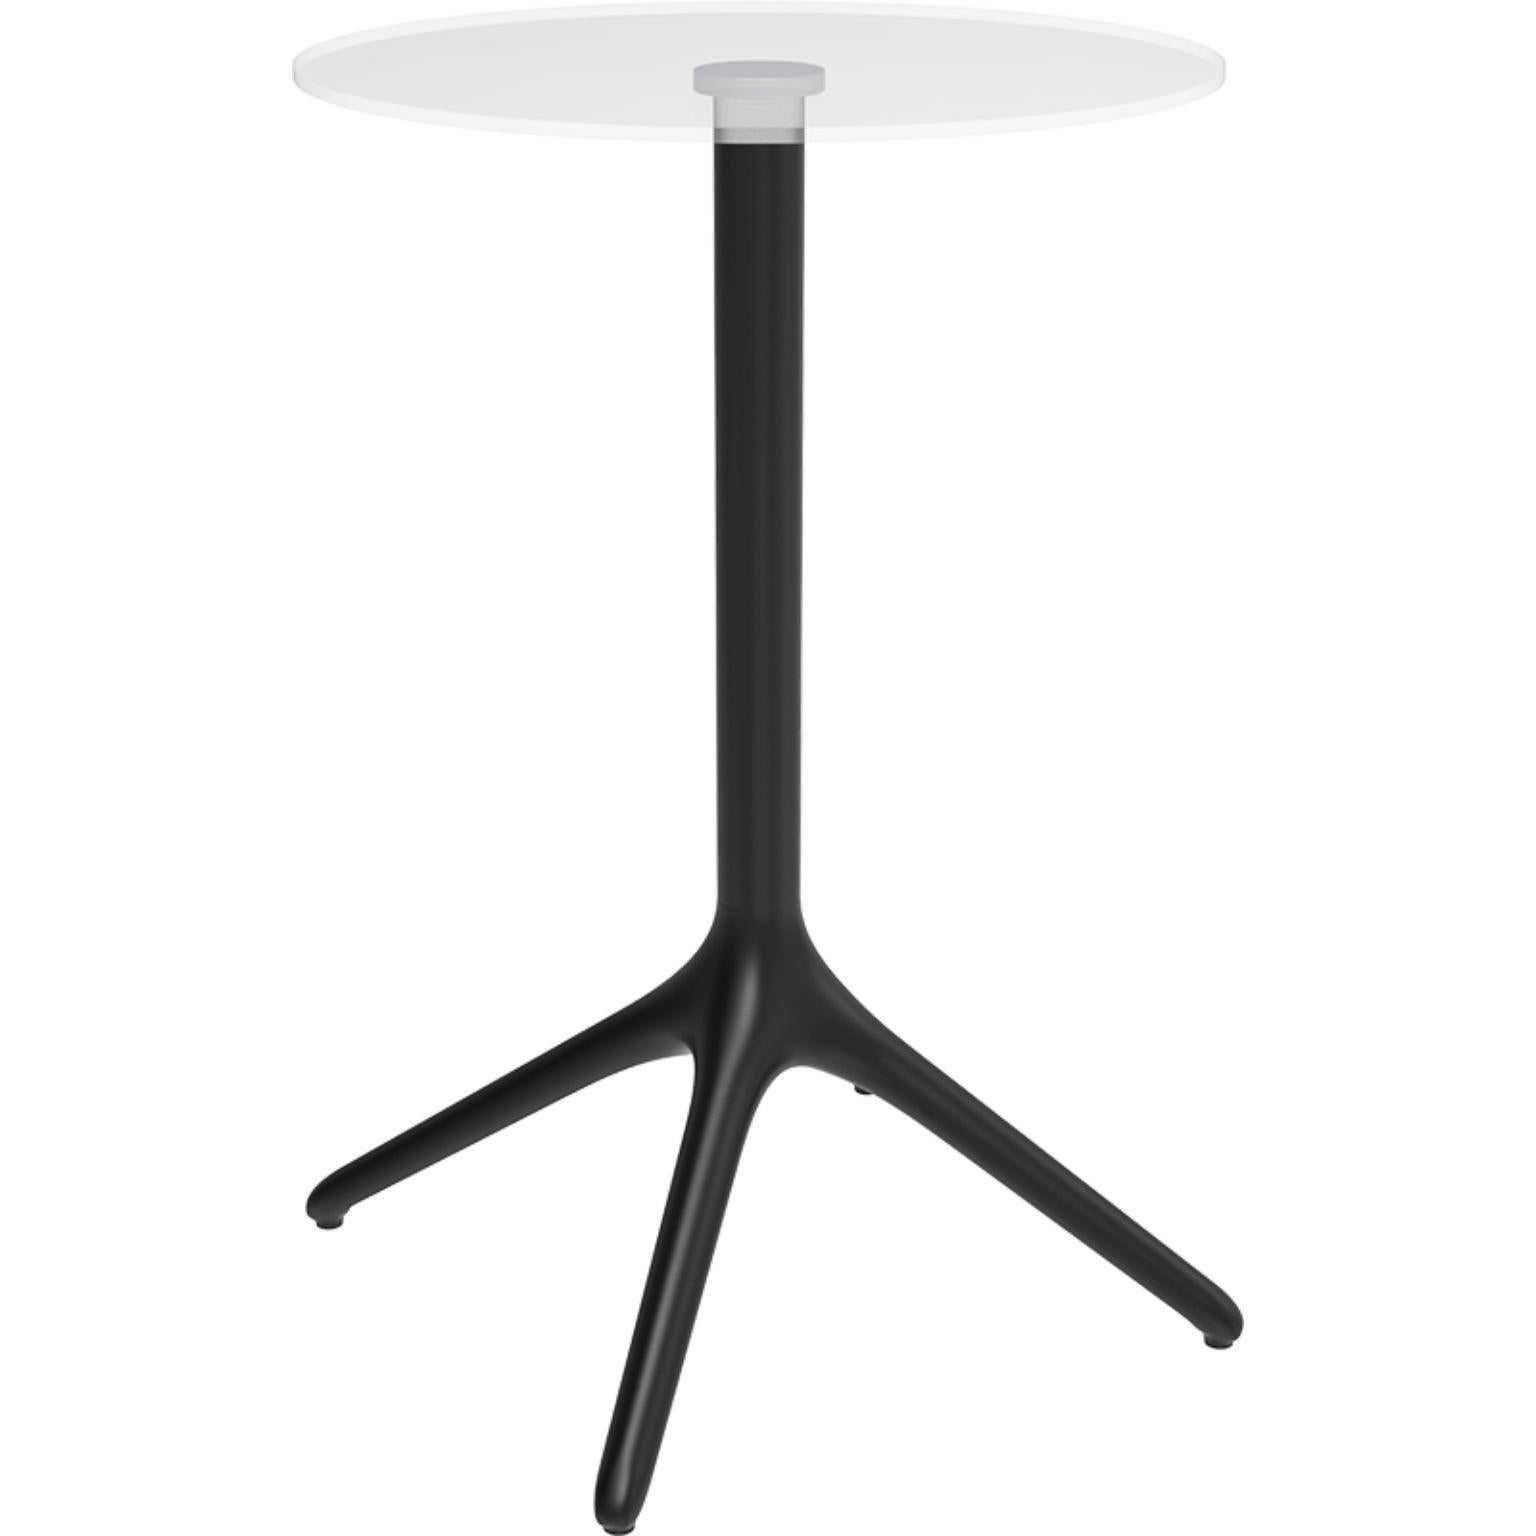 Uni black table XL 105 by Mowee.
Dimensions: D50 x H105 cm
Material: Aluminium, Tempered Glass
Weight: 9.7 kg
Also Available in different colours and finishes. 

A table designed to be as versatile as possible and can coexist with a variety of